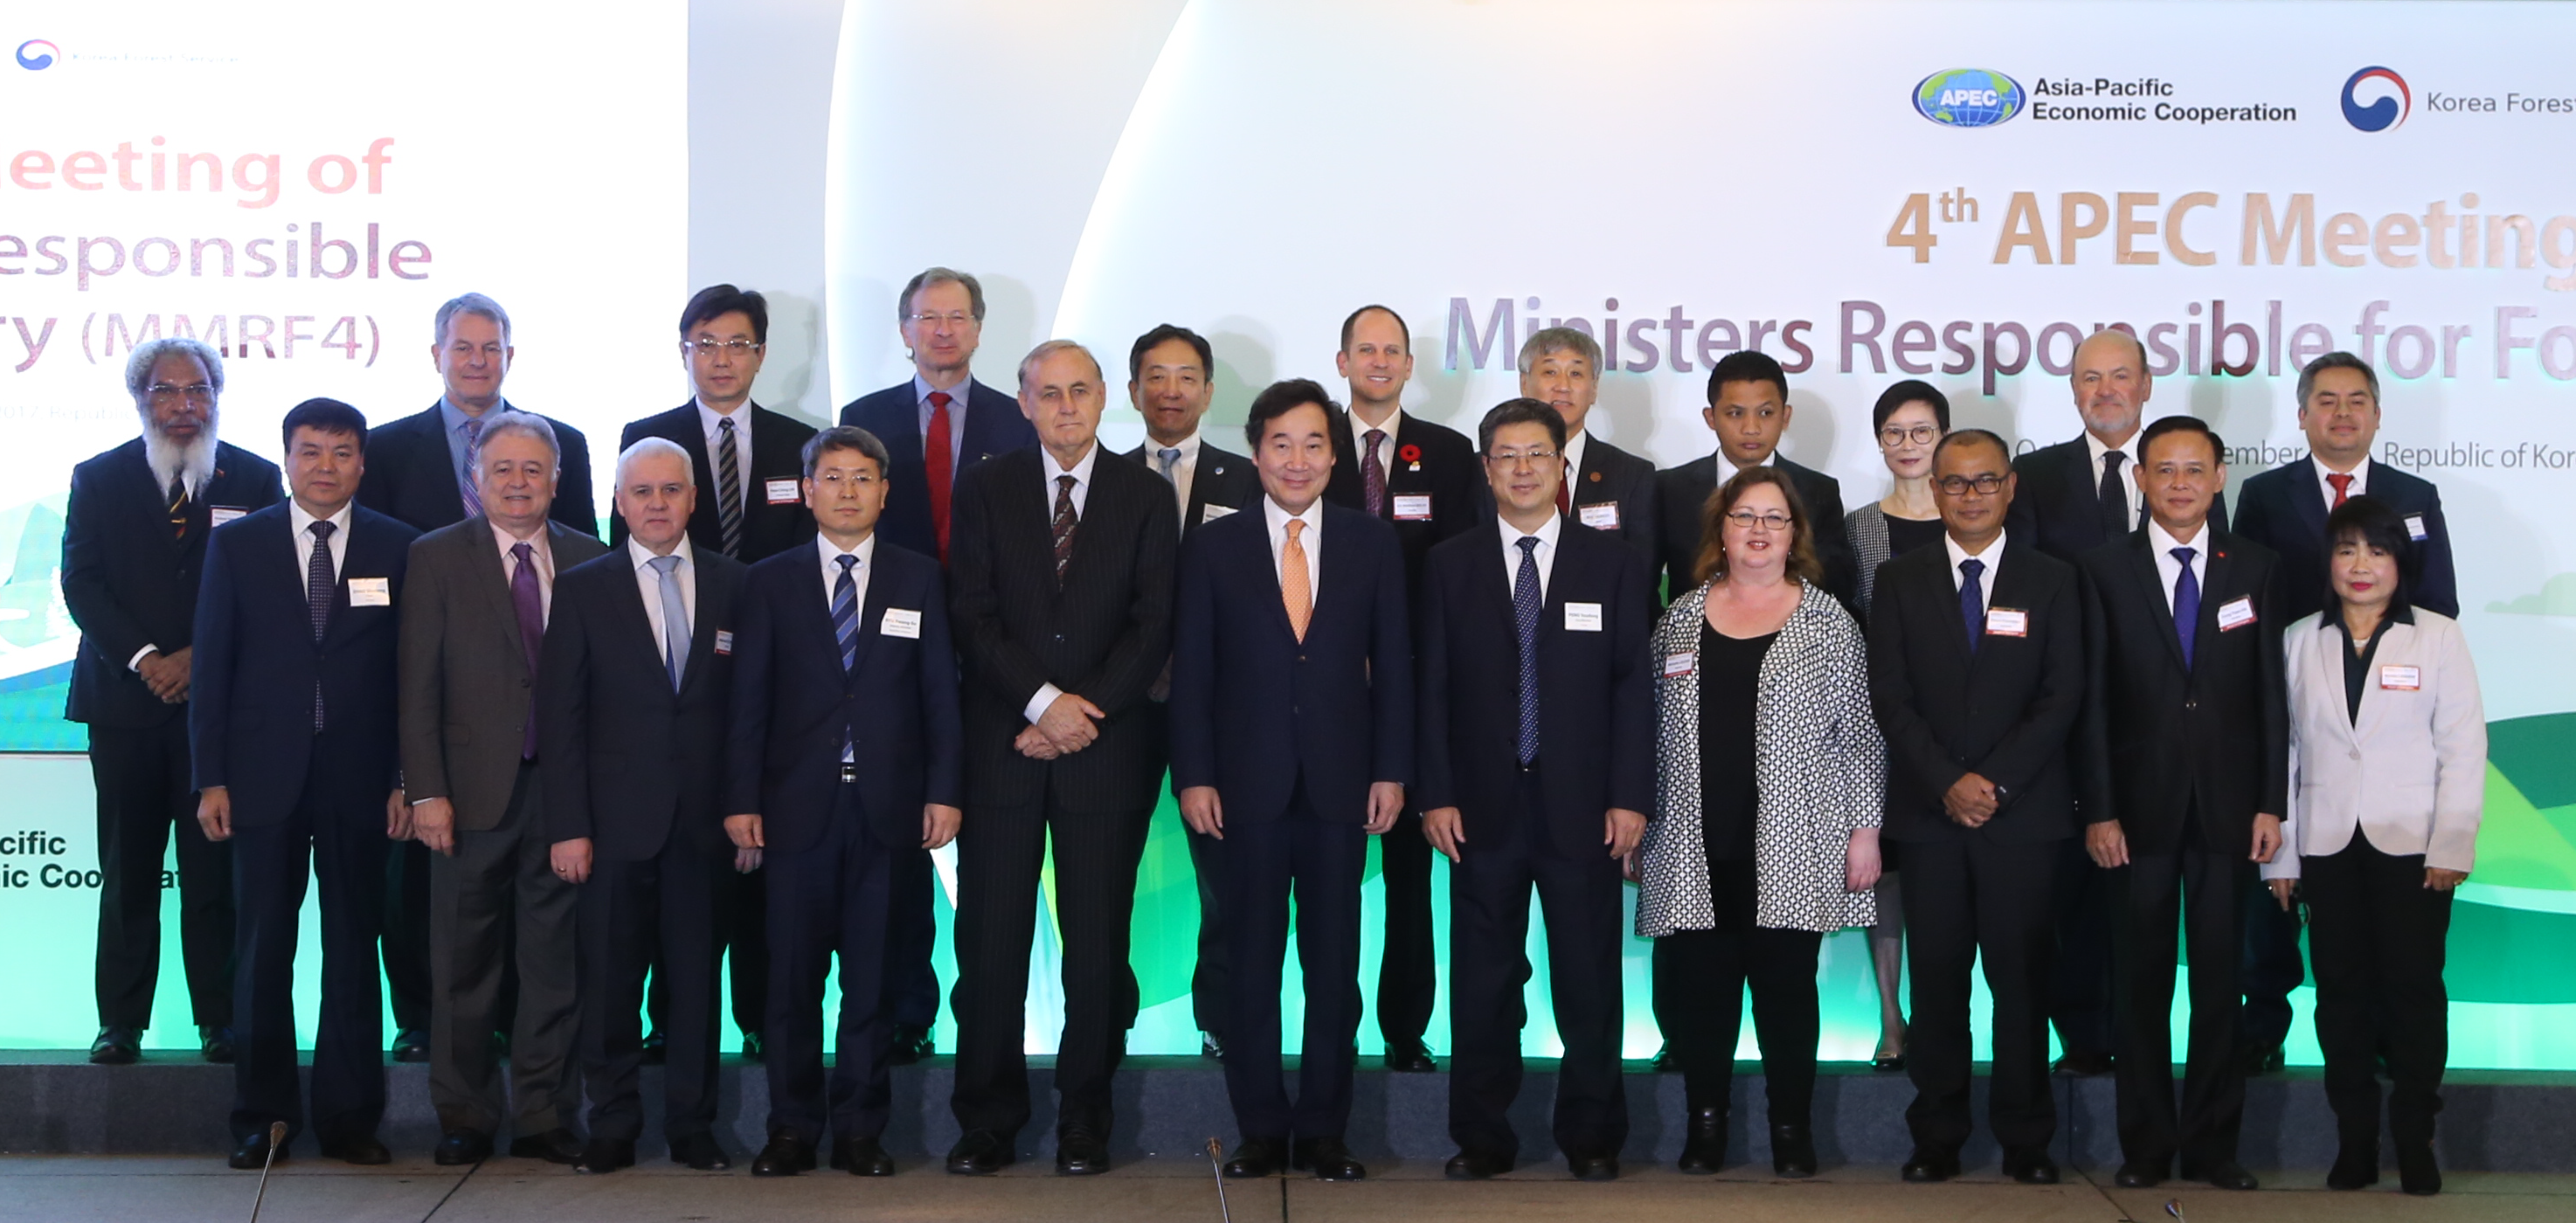 APEC Meeting of Ministers Responsible for Forestry 이미지1